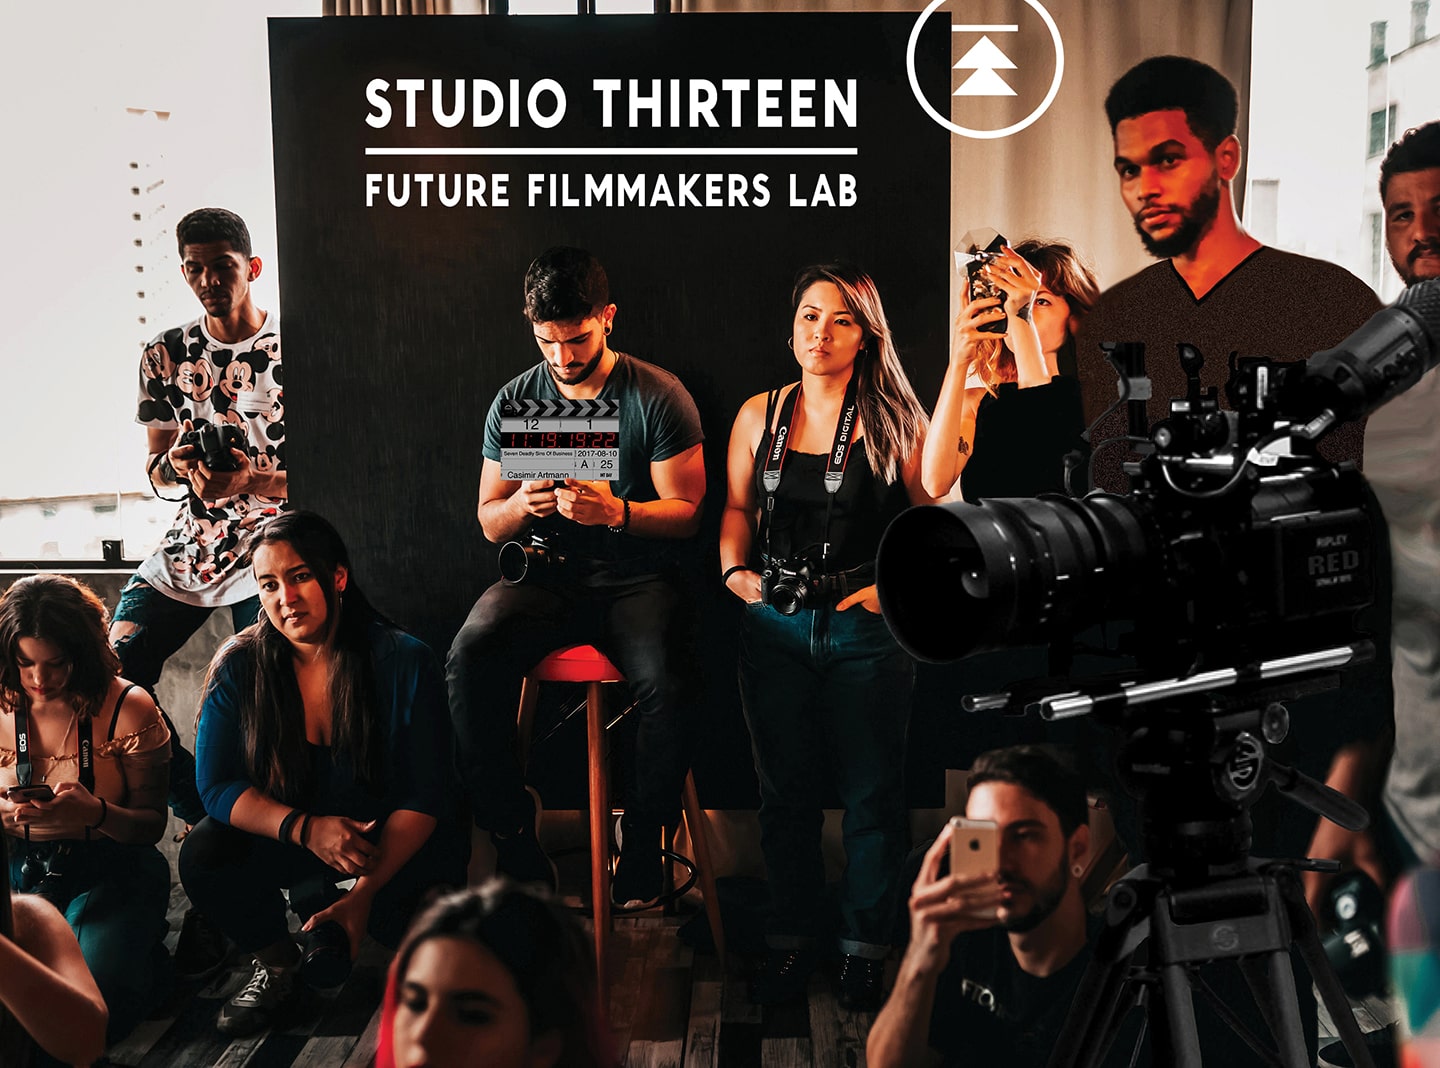 Group of young adults gathered. Some holding DSLRs and mobile phones. A sign in the background titled "Studio Thirteen, Future Filmmakers Lab"